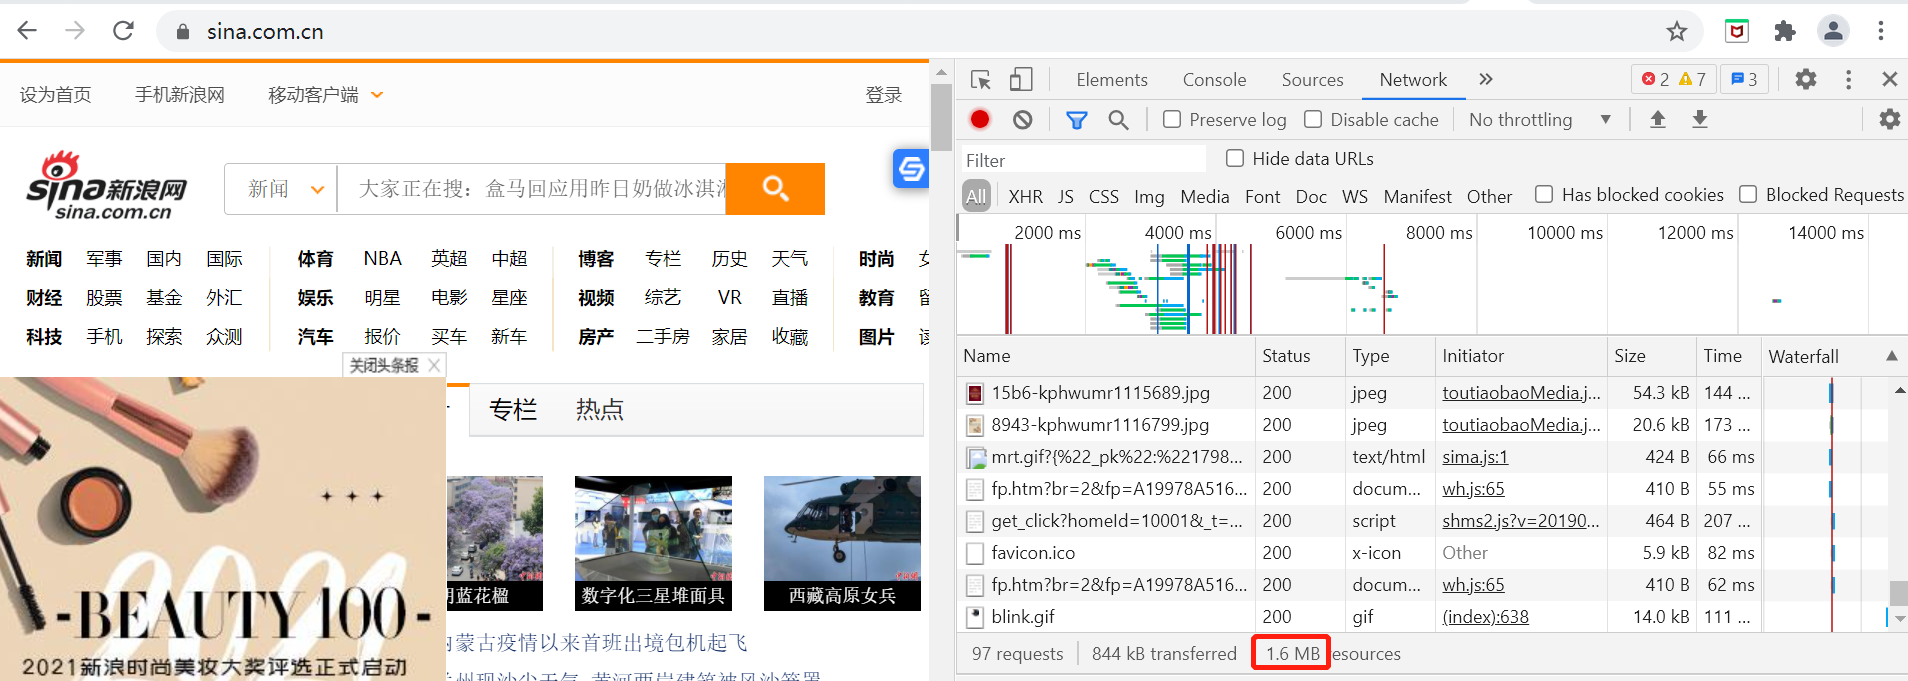 Sina Homepage Loading 1.6M-Site Loading Speed ​​and Size-米国生活